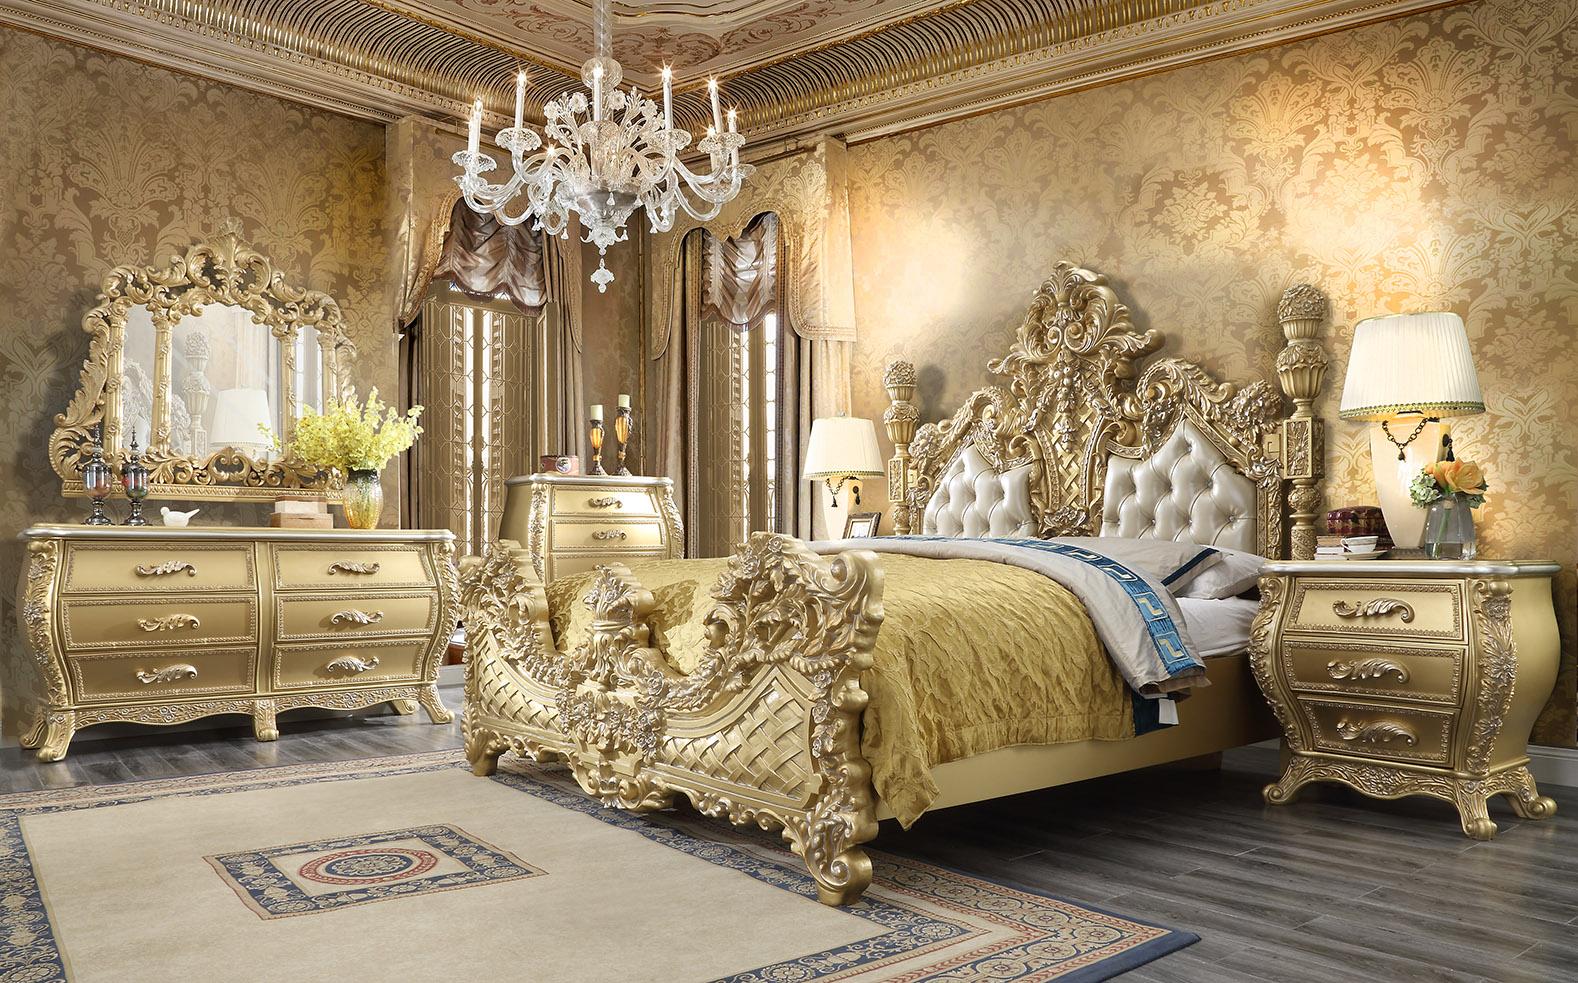 Traditional Panel Bedroom Set HD-1801 HD-1801-BSET5-CK in Metallic, Gold Finish, Antique Leather